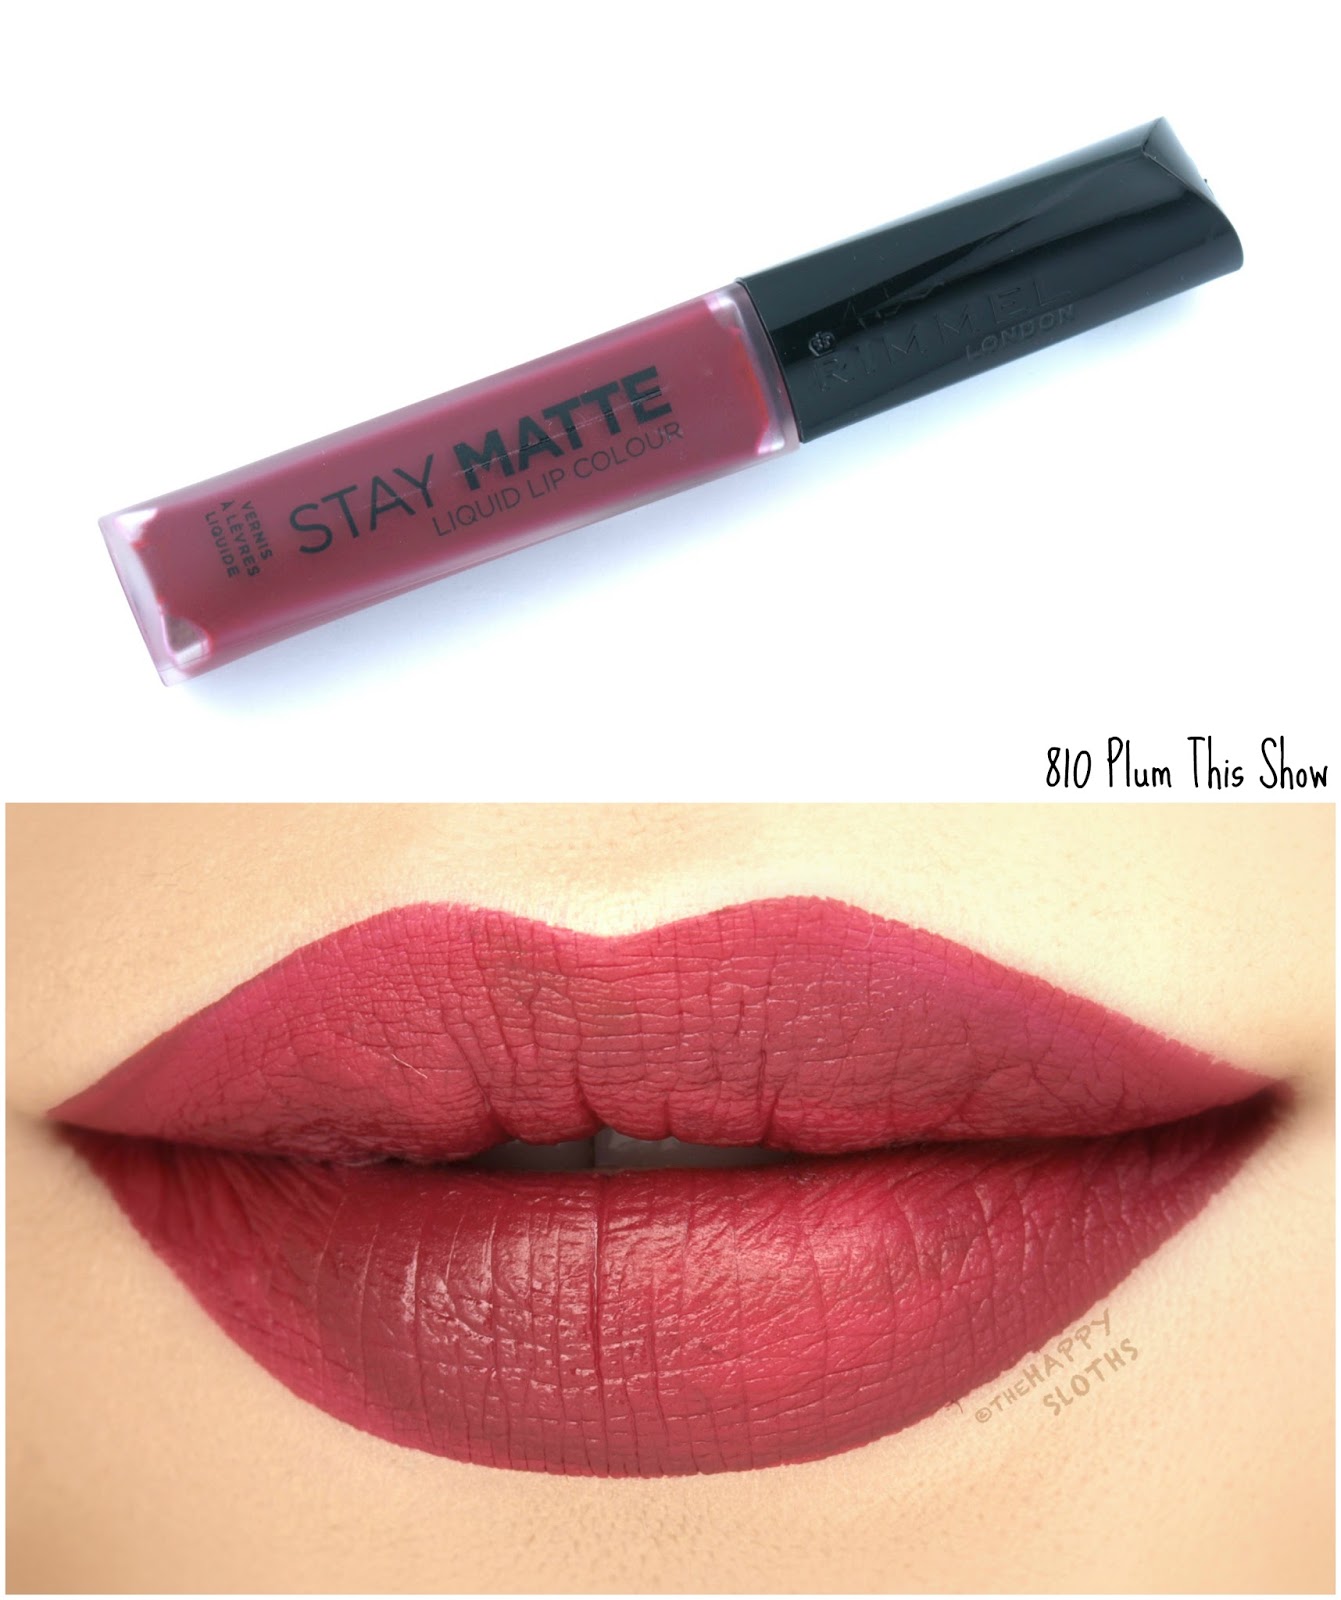 Rimmel London Stay Matte Liquid Lip Colour | 810 Plum This Show: Review and Swatches